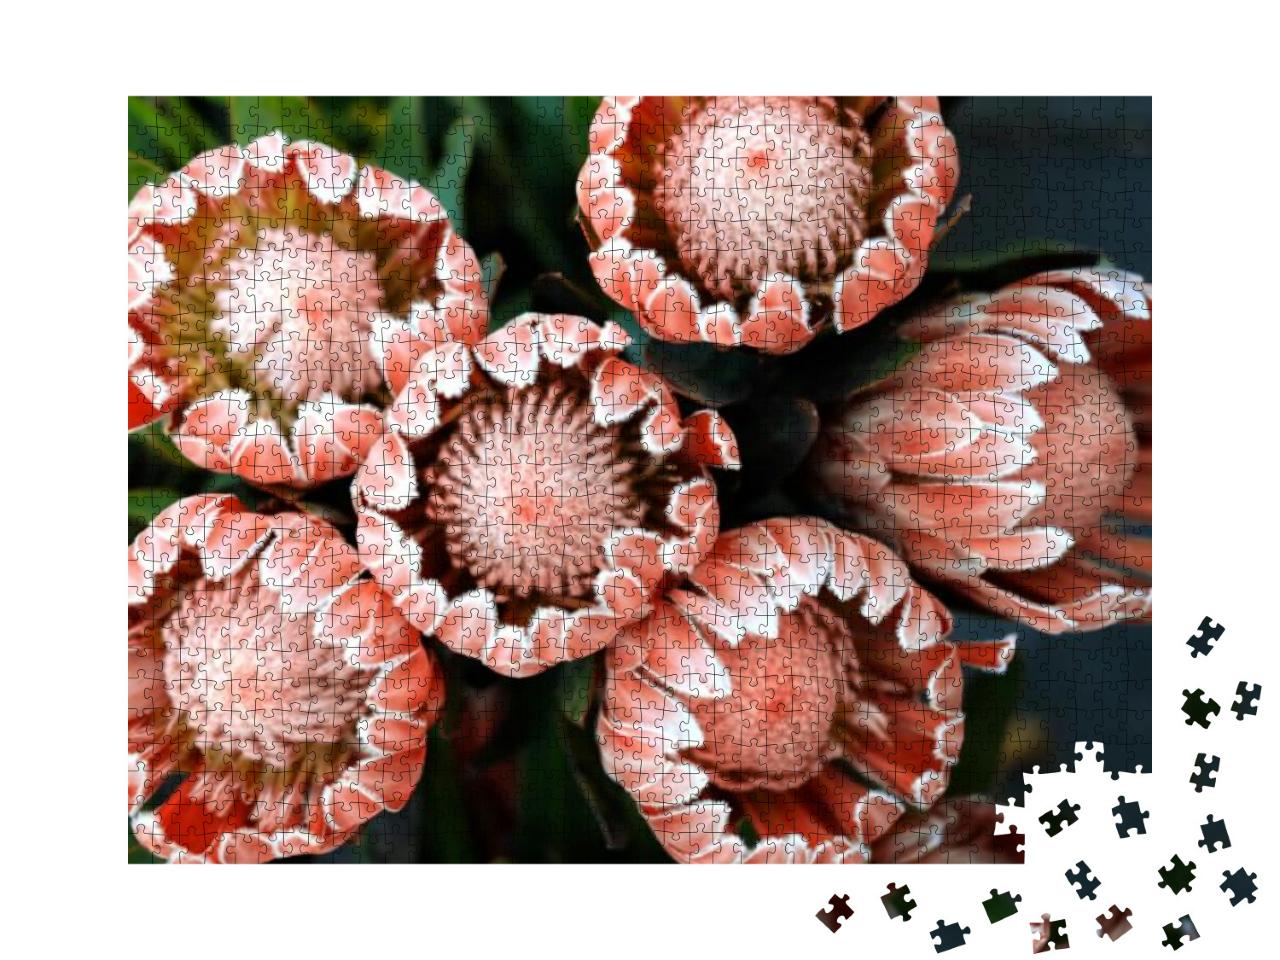 King Protea or Protea Cynaroides is Flowering with Large... Jigsaw Puzzle with 1000 pieces